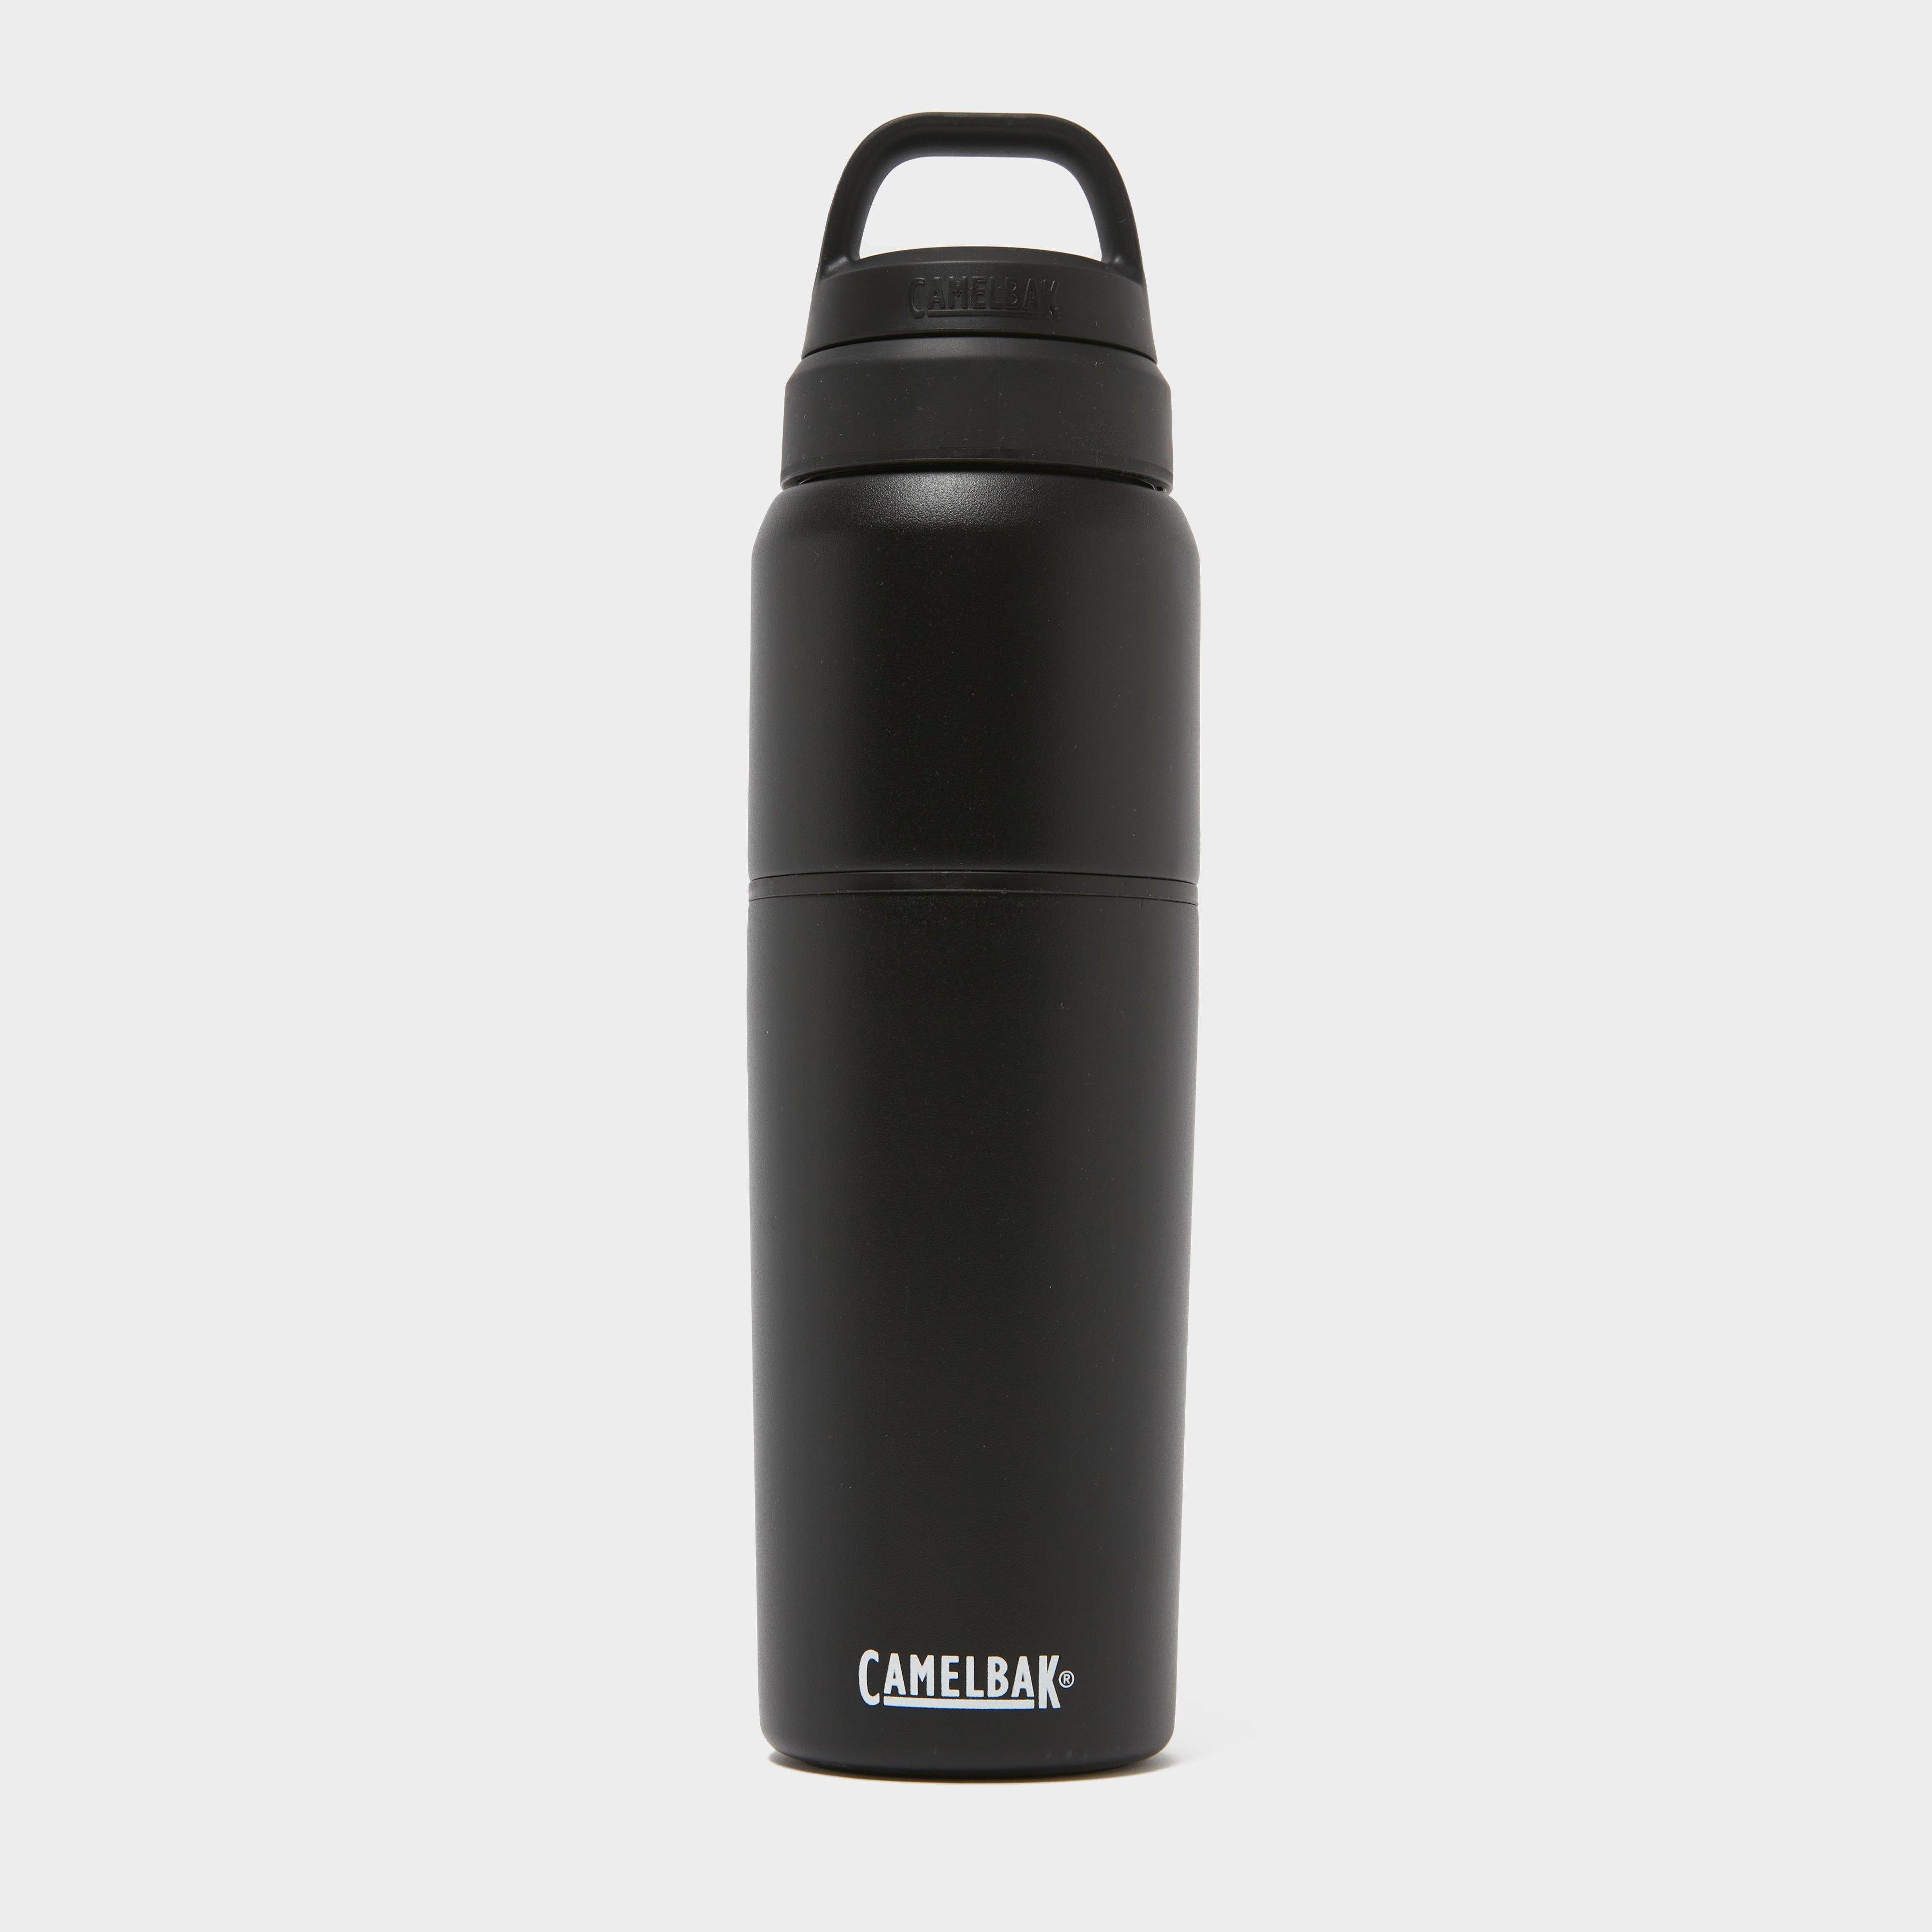 Camelbak Multibev Sst Vaccum Insulated 650ml Bottle With 480ml Cup  Black